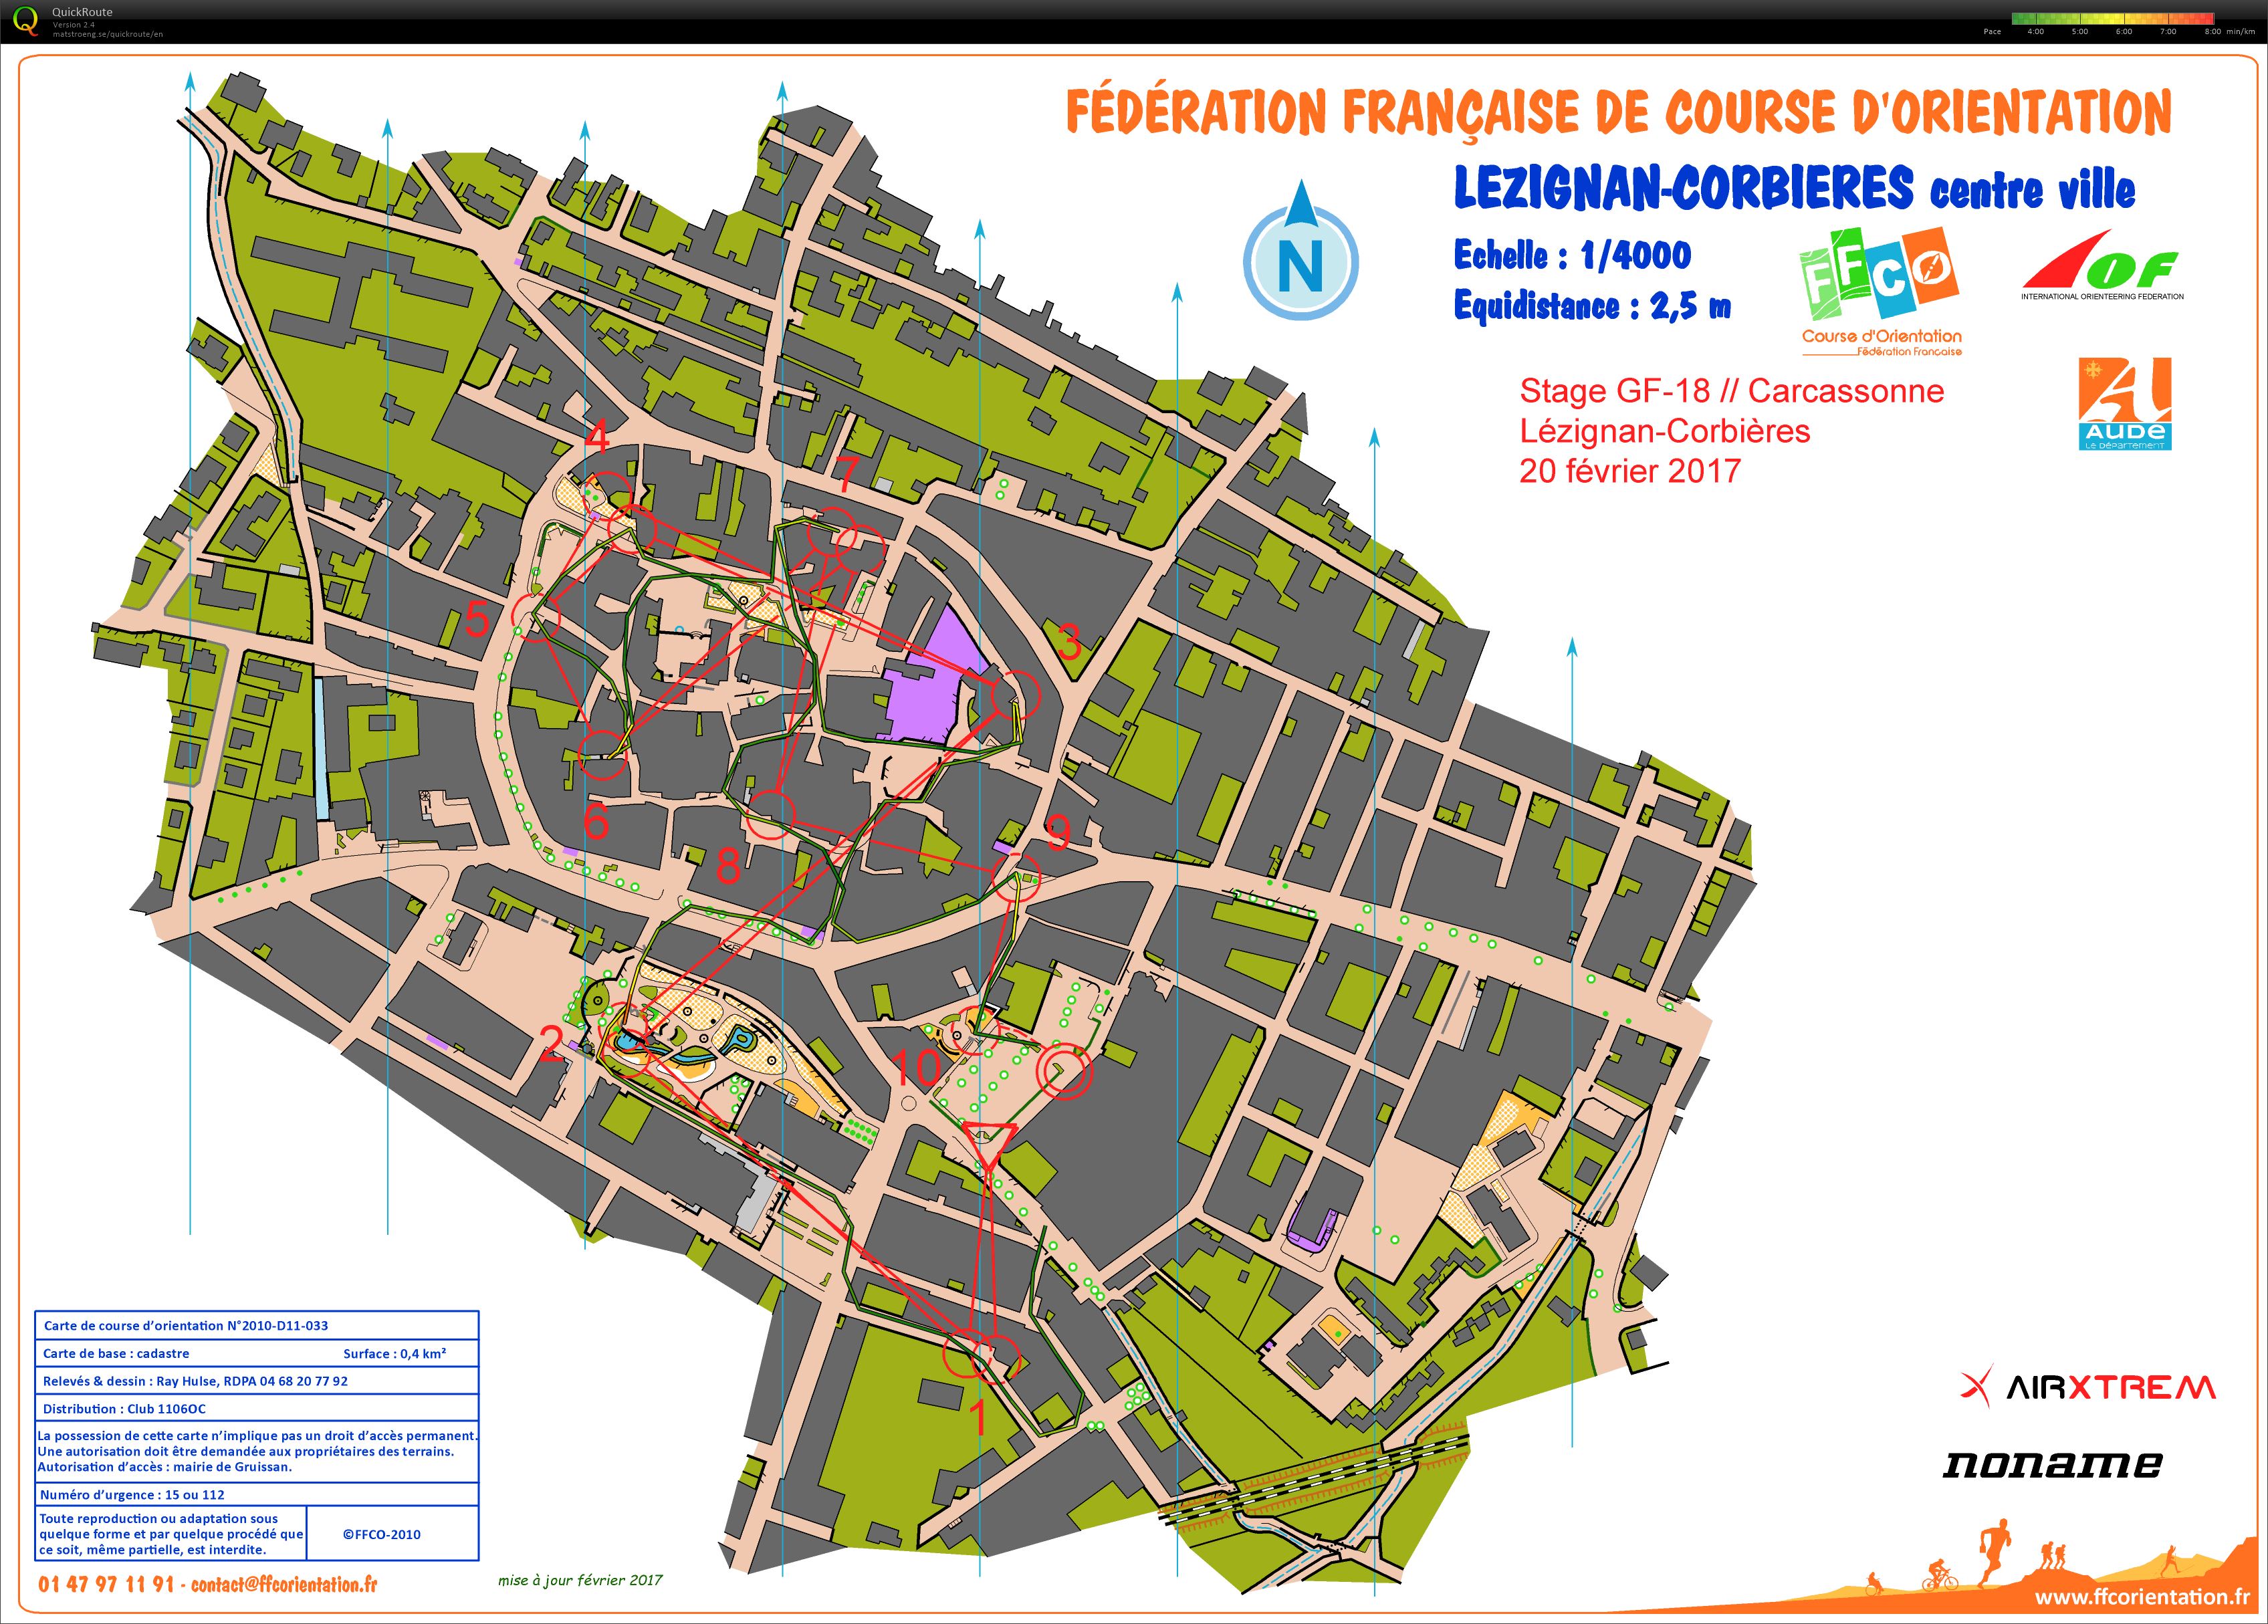 Manche 1 (chasse) relais sprint stage gf-18 Carcassonne (20-02-2017)